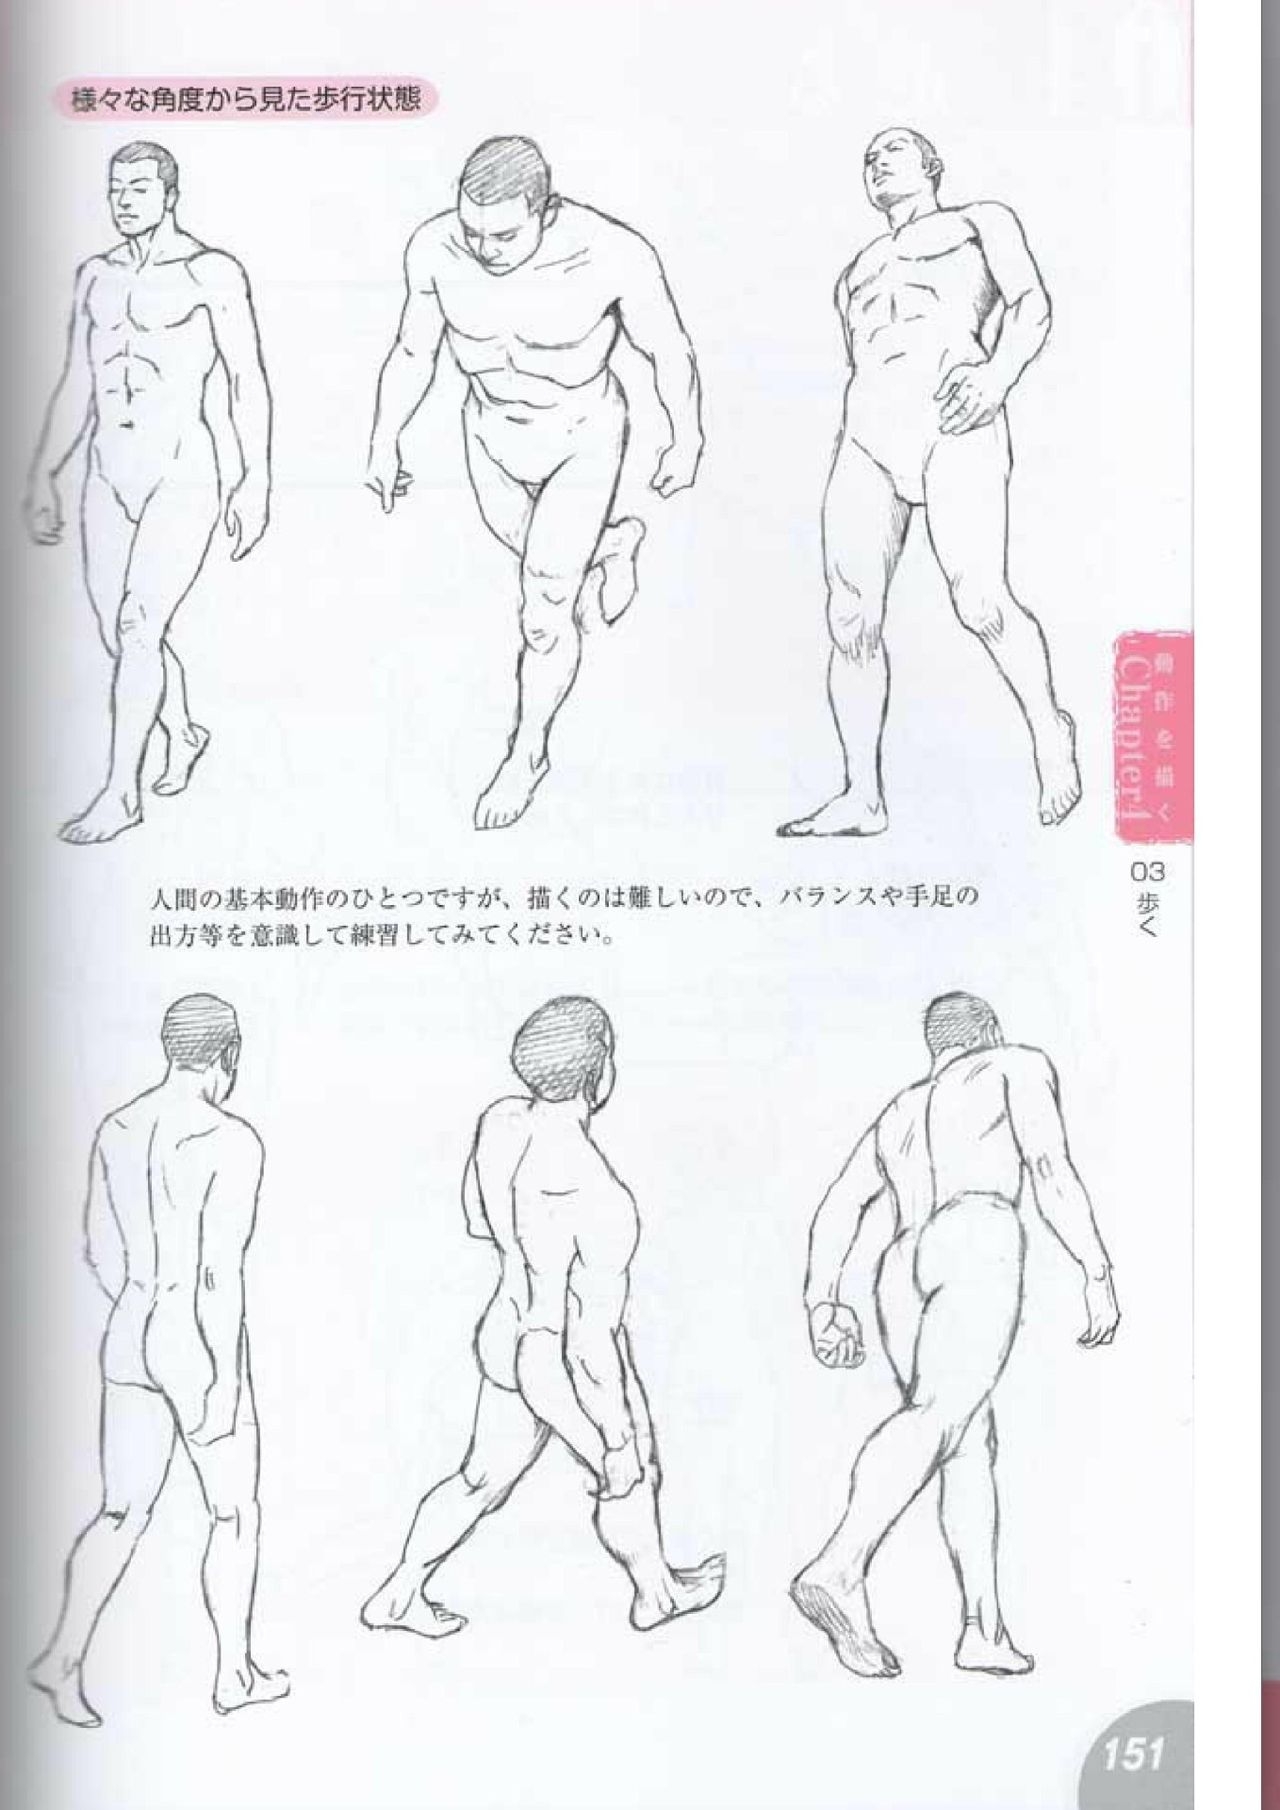 How to draw a character drawing from a human anatomical chart 149